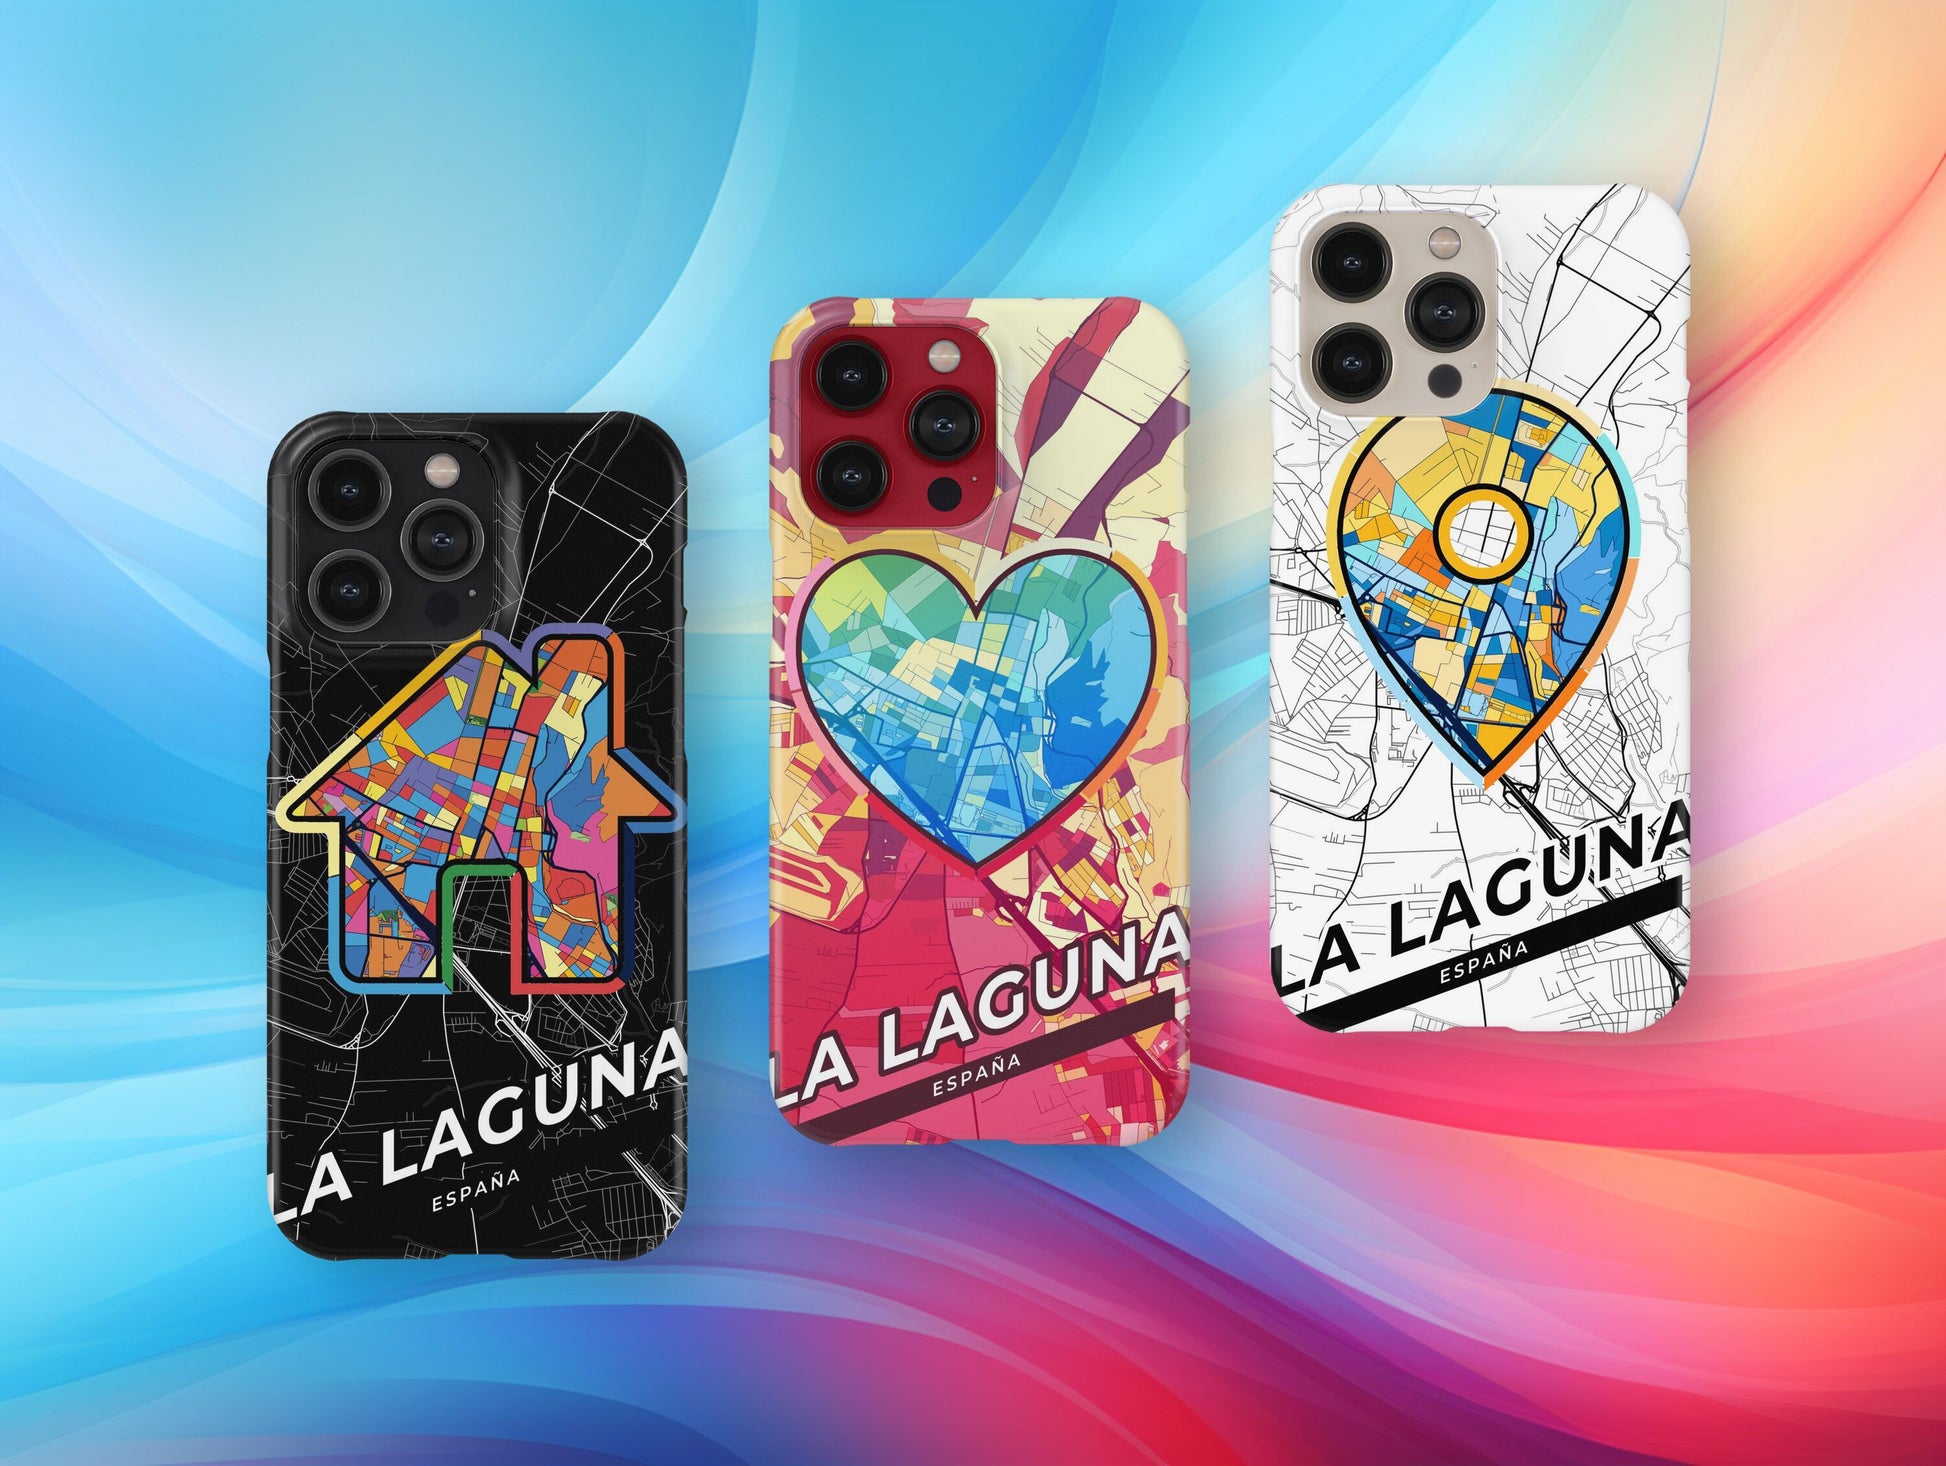 La Laguna Spain slim phone case with colorful icon. Birthday, wedding or housewarming gift. Couple match cases.